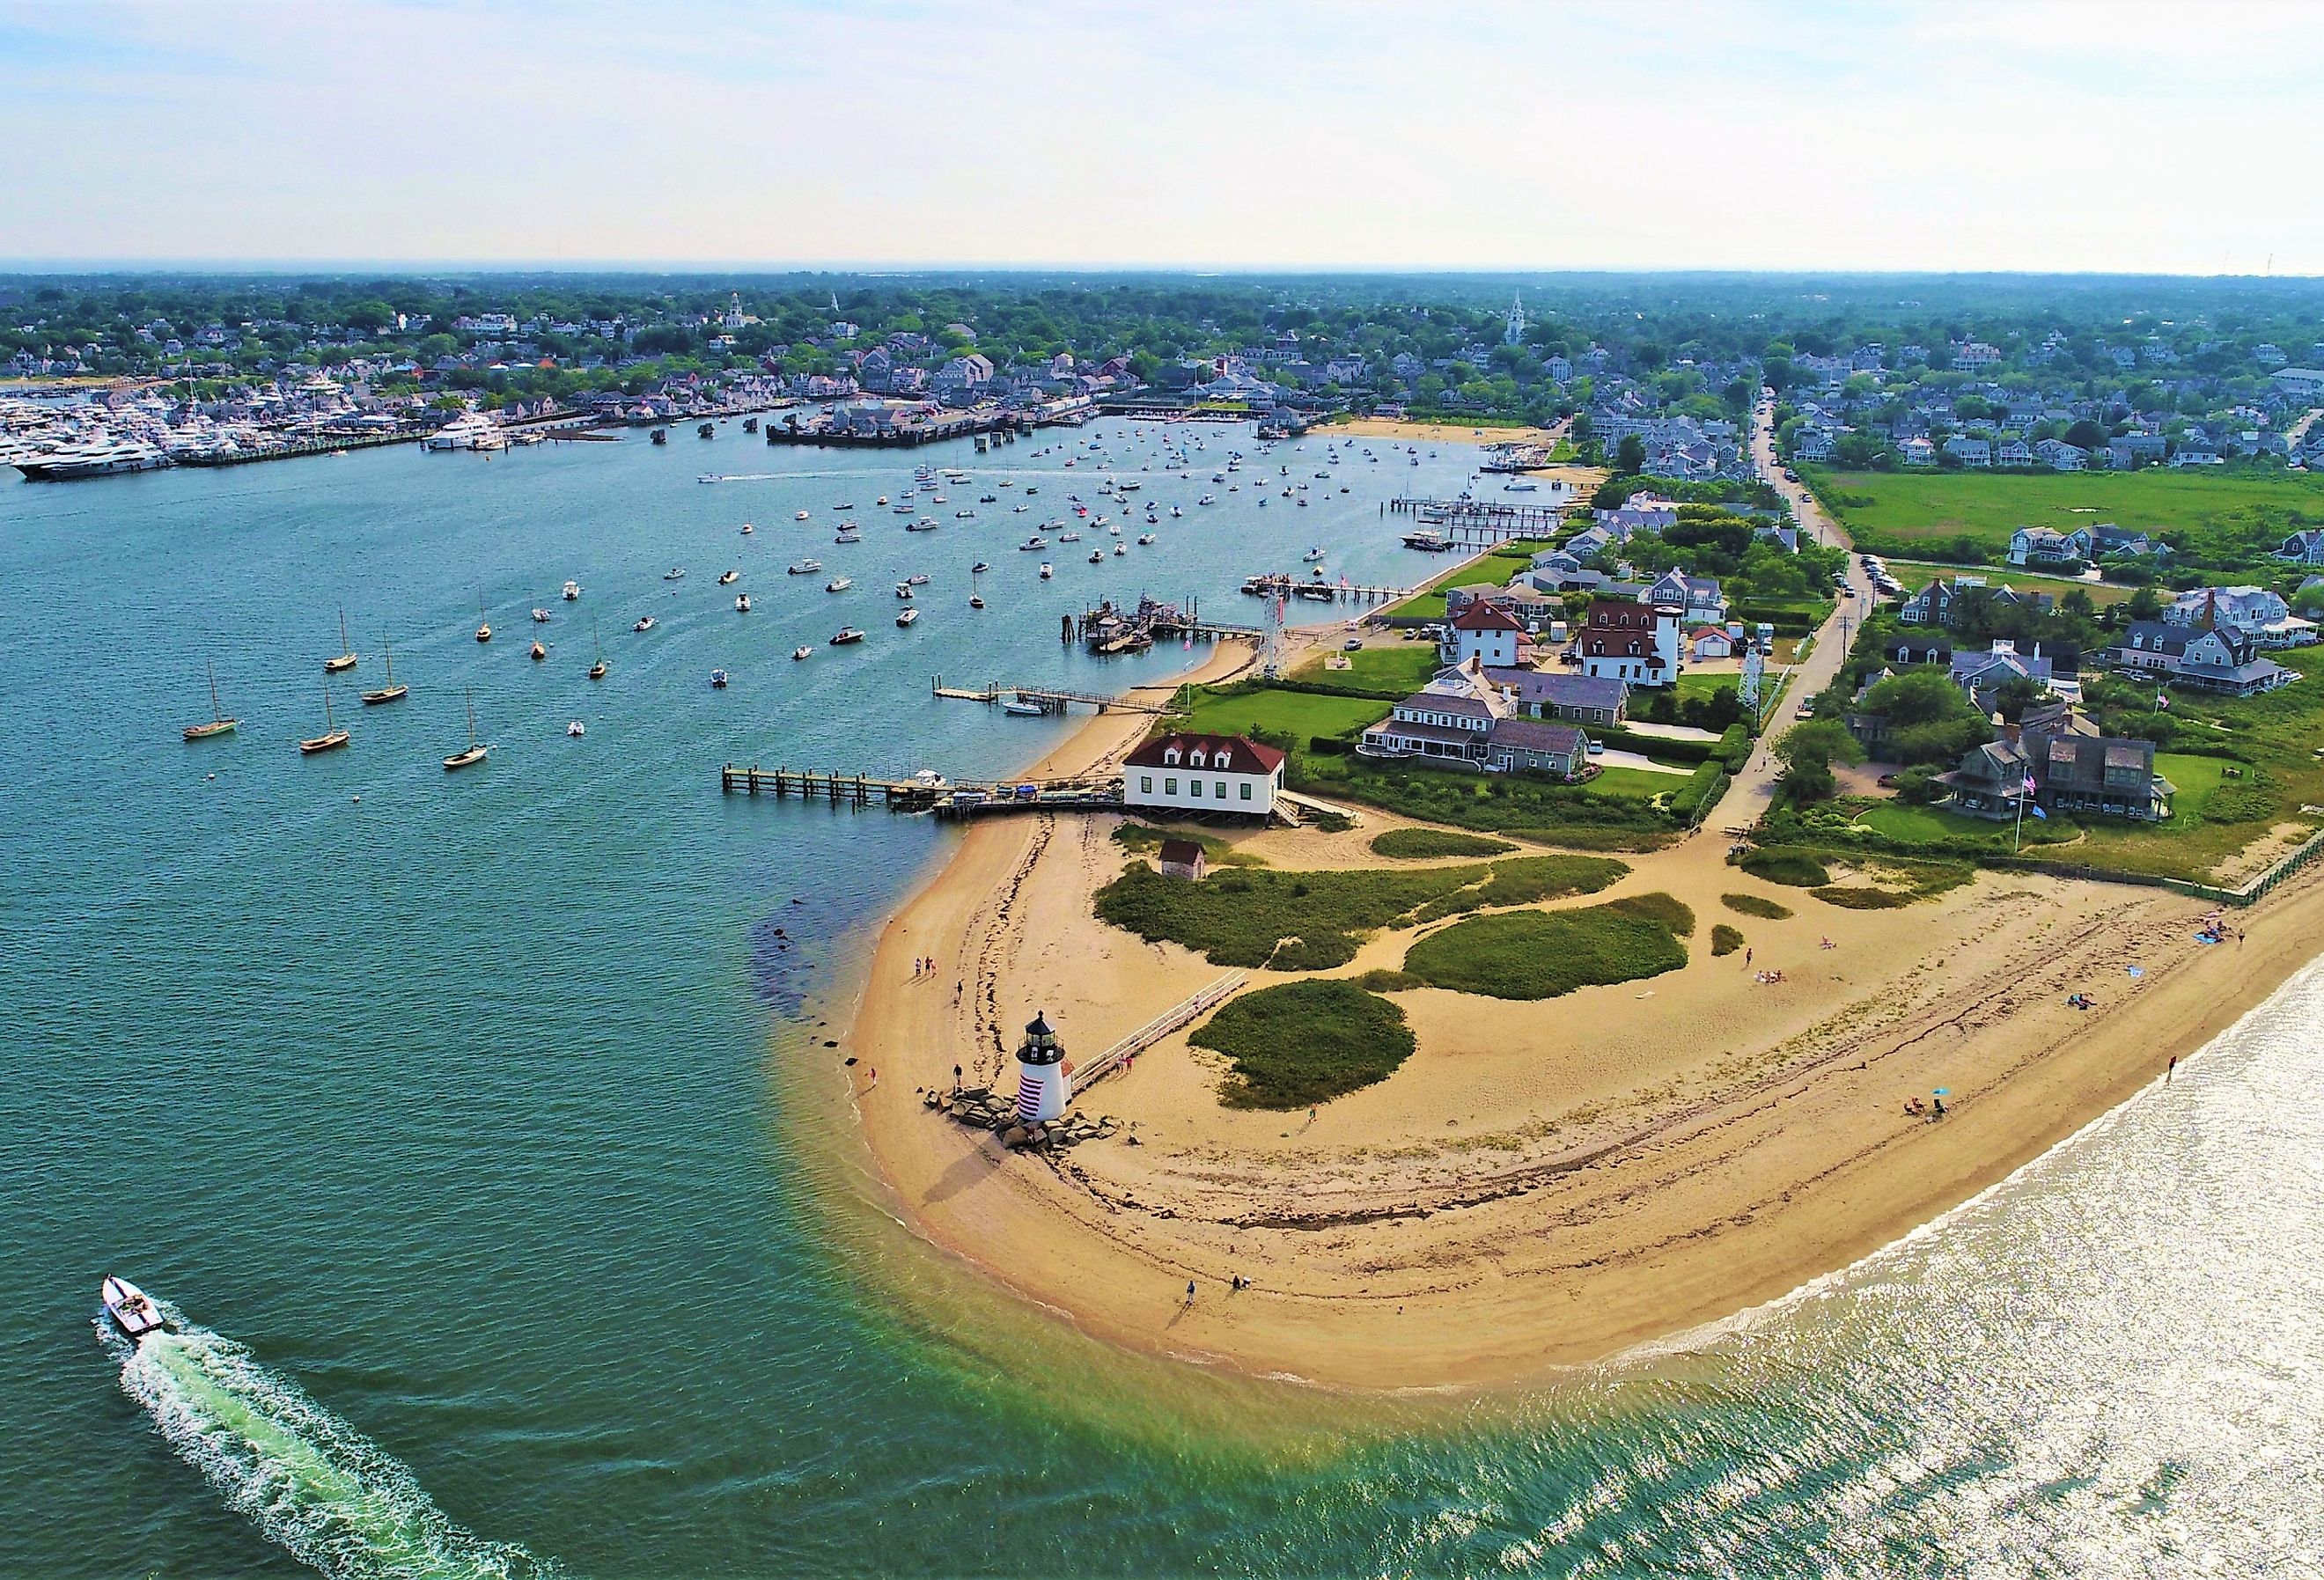 Aerial view of the entrance of Nantucket, Massachusetts. Image credit TeBe Inspires via Shutterstock.